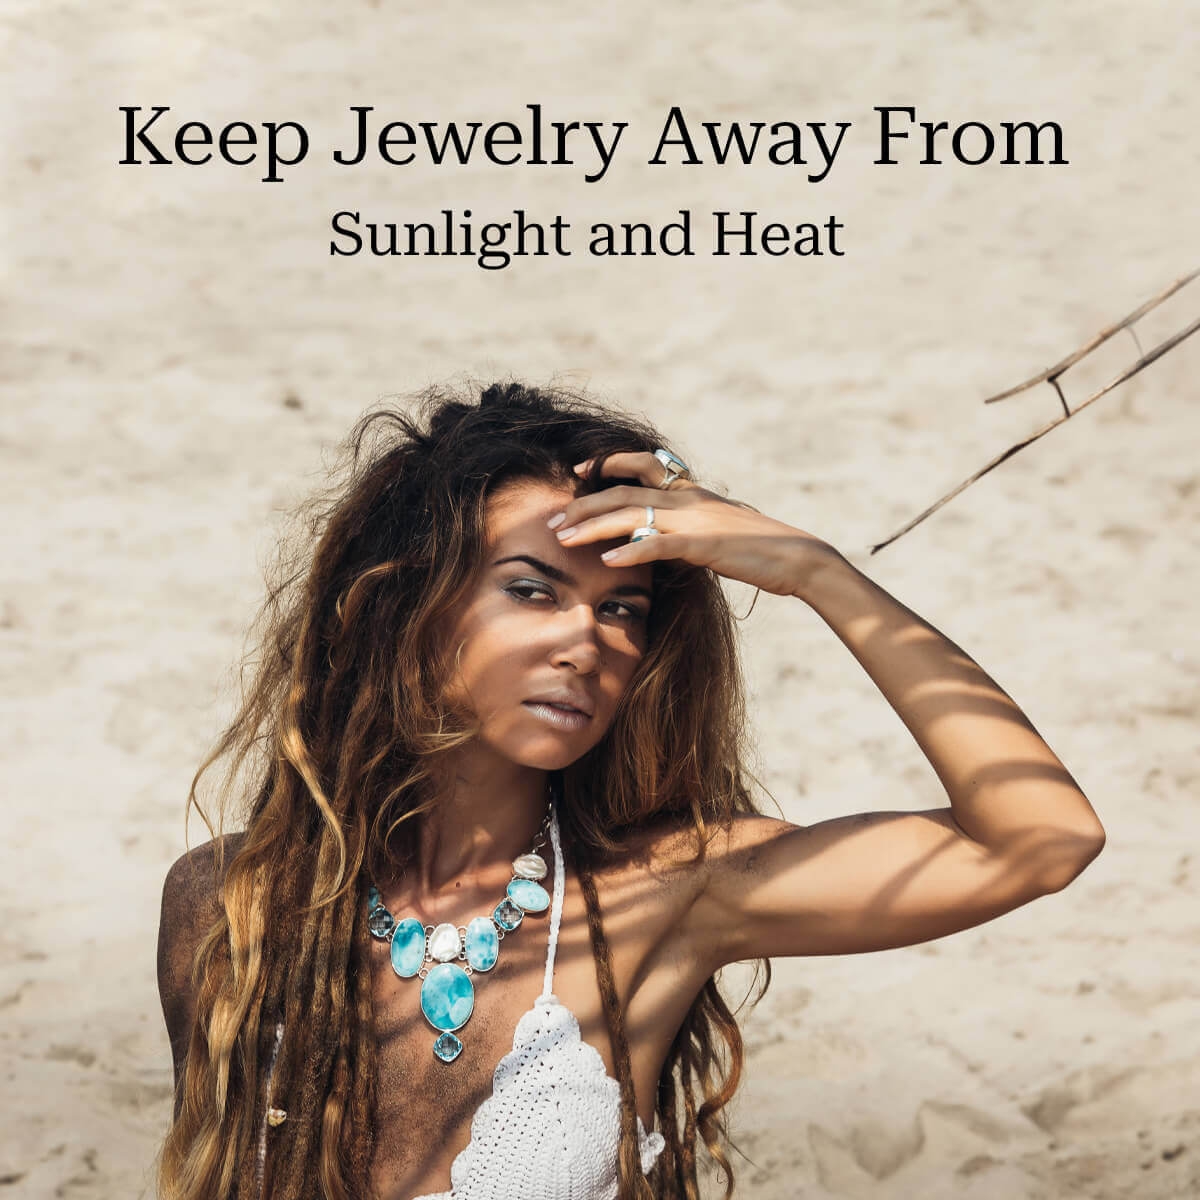 Keep Jewelry Away From Sunlight and Heat